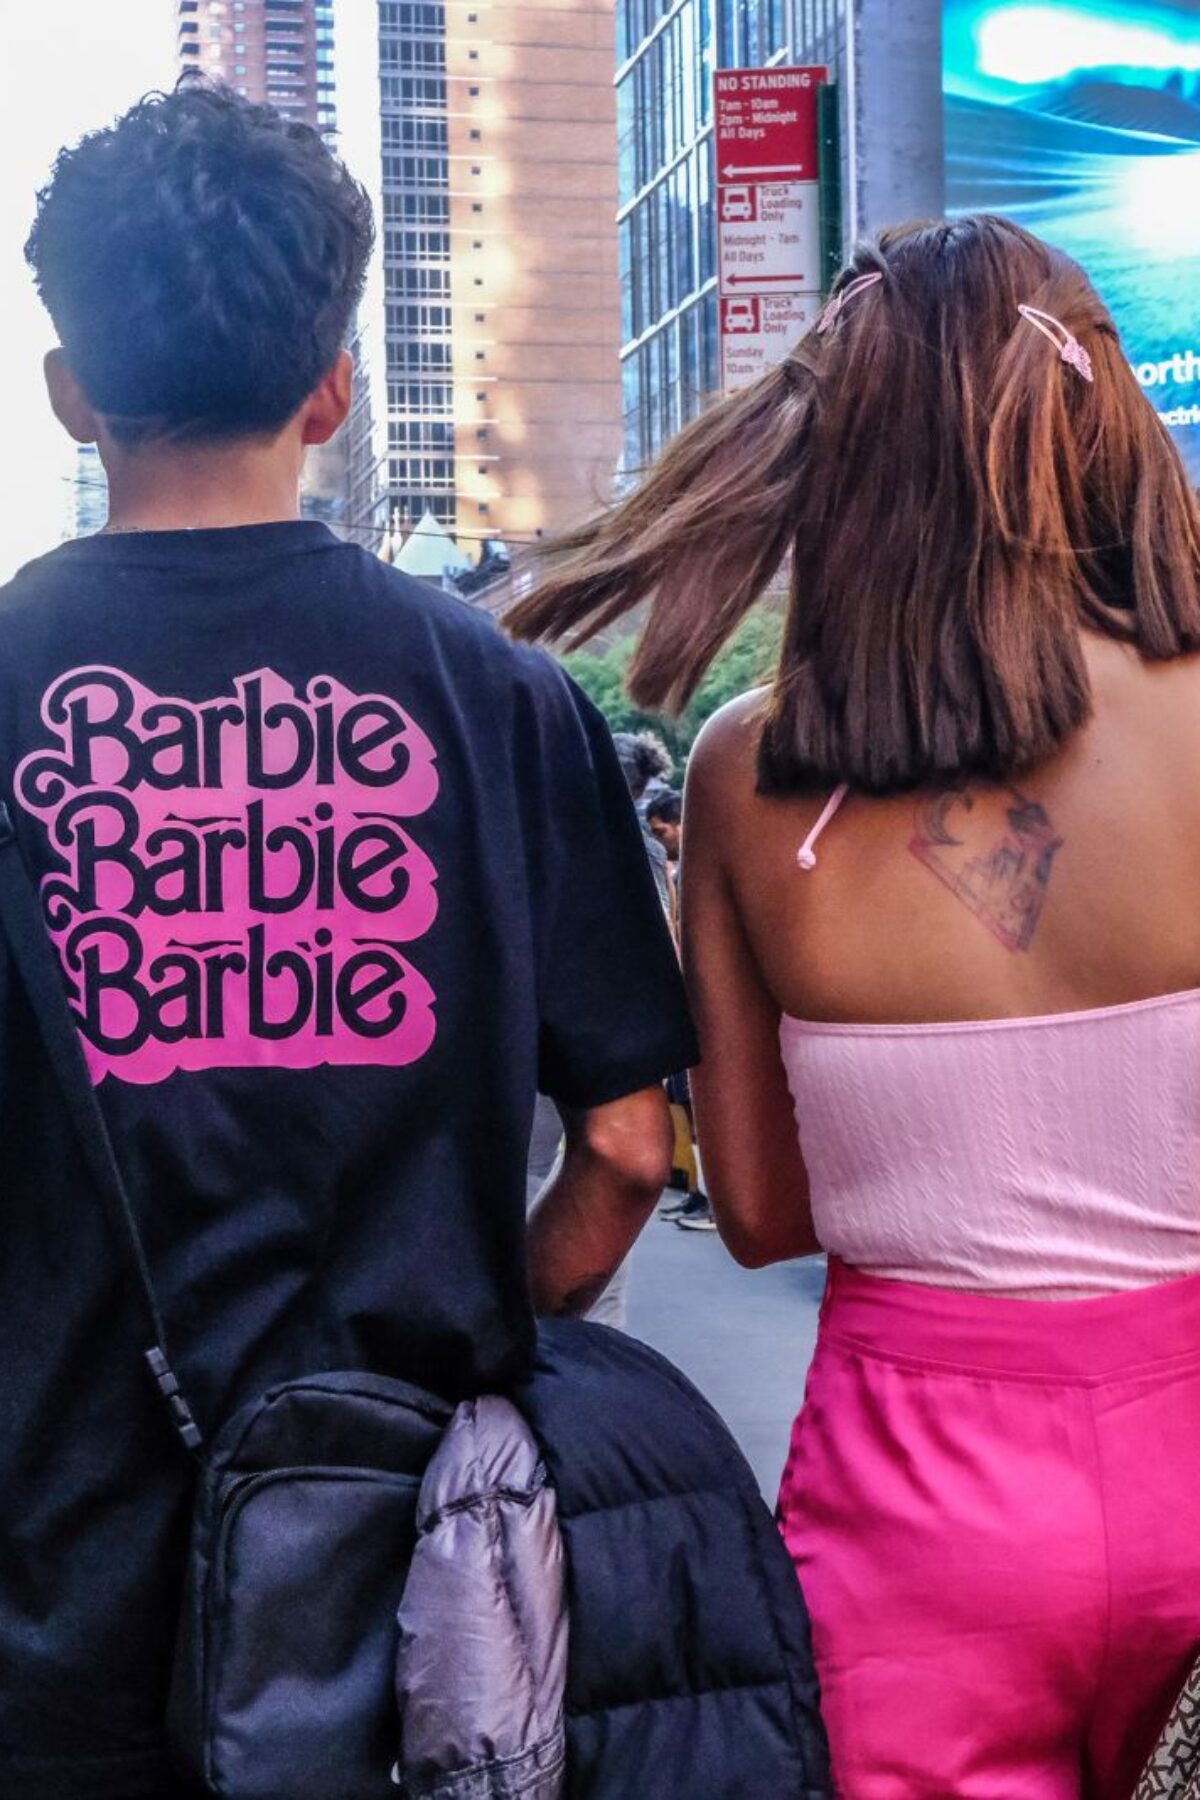 NEW YORK, NEW YORK - JULY 21: People dress up as the doll Barbie to attend the Barbie movie on July 21, 2023 in New York City. On the opening day, director Greta Gerwig's film 